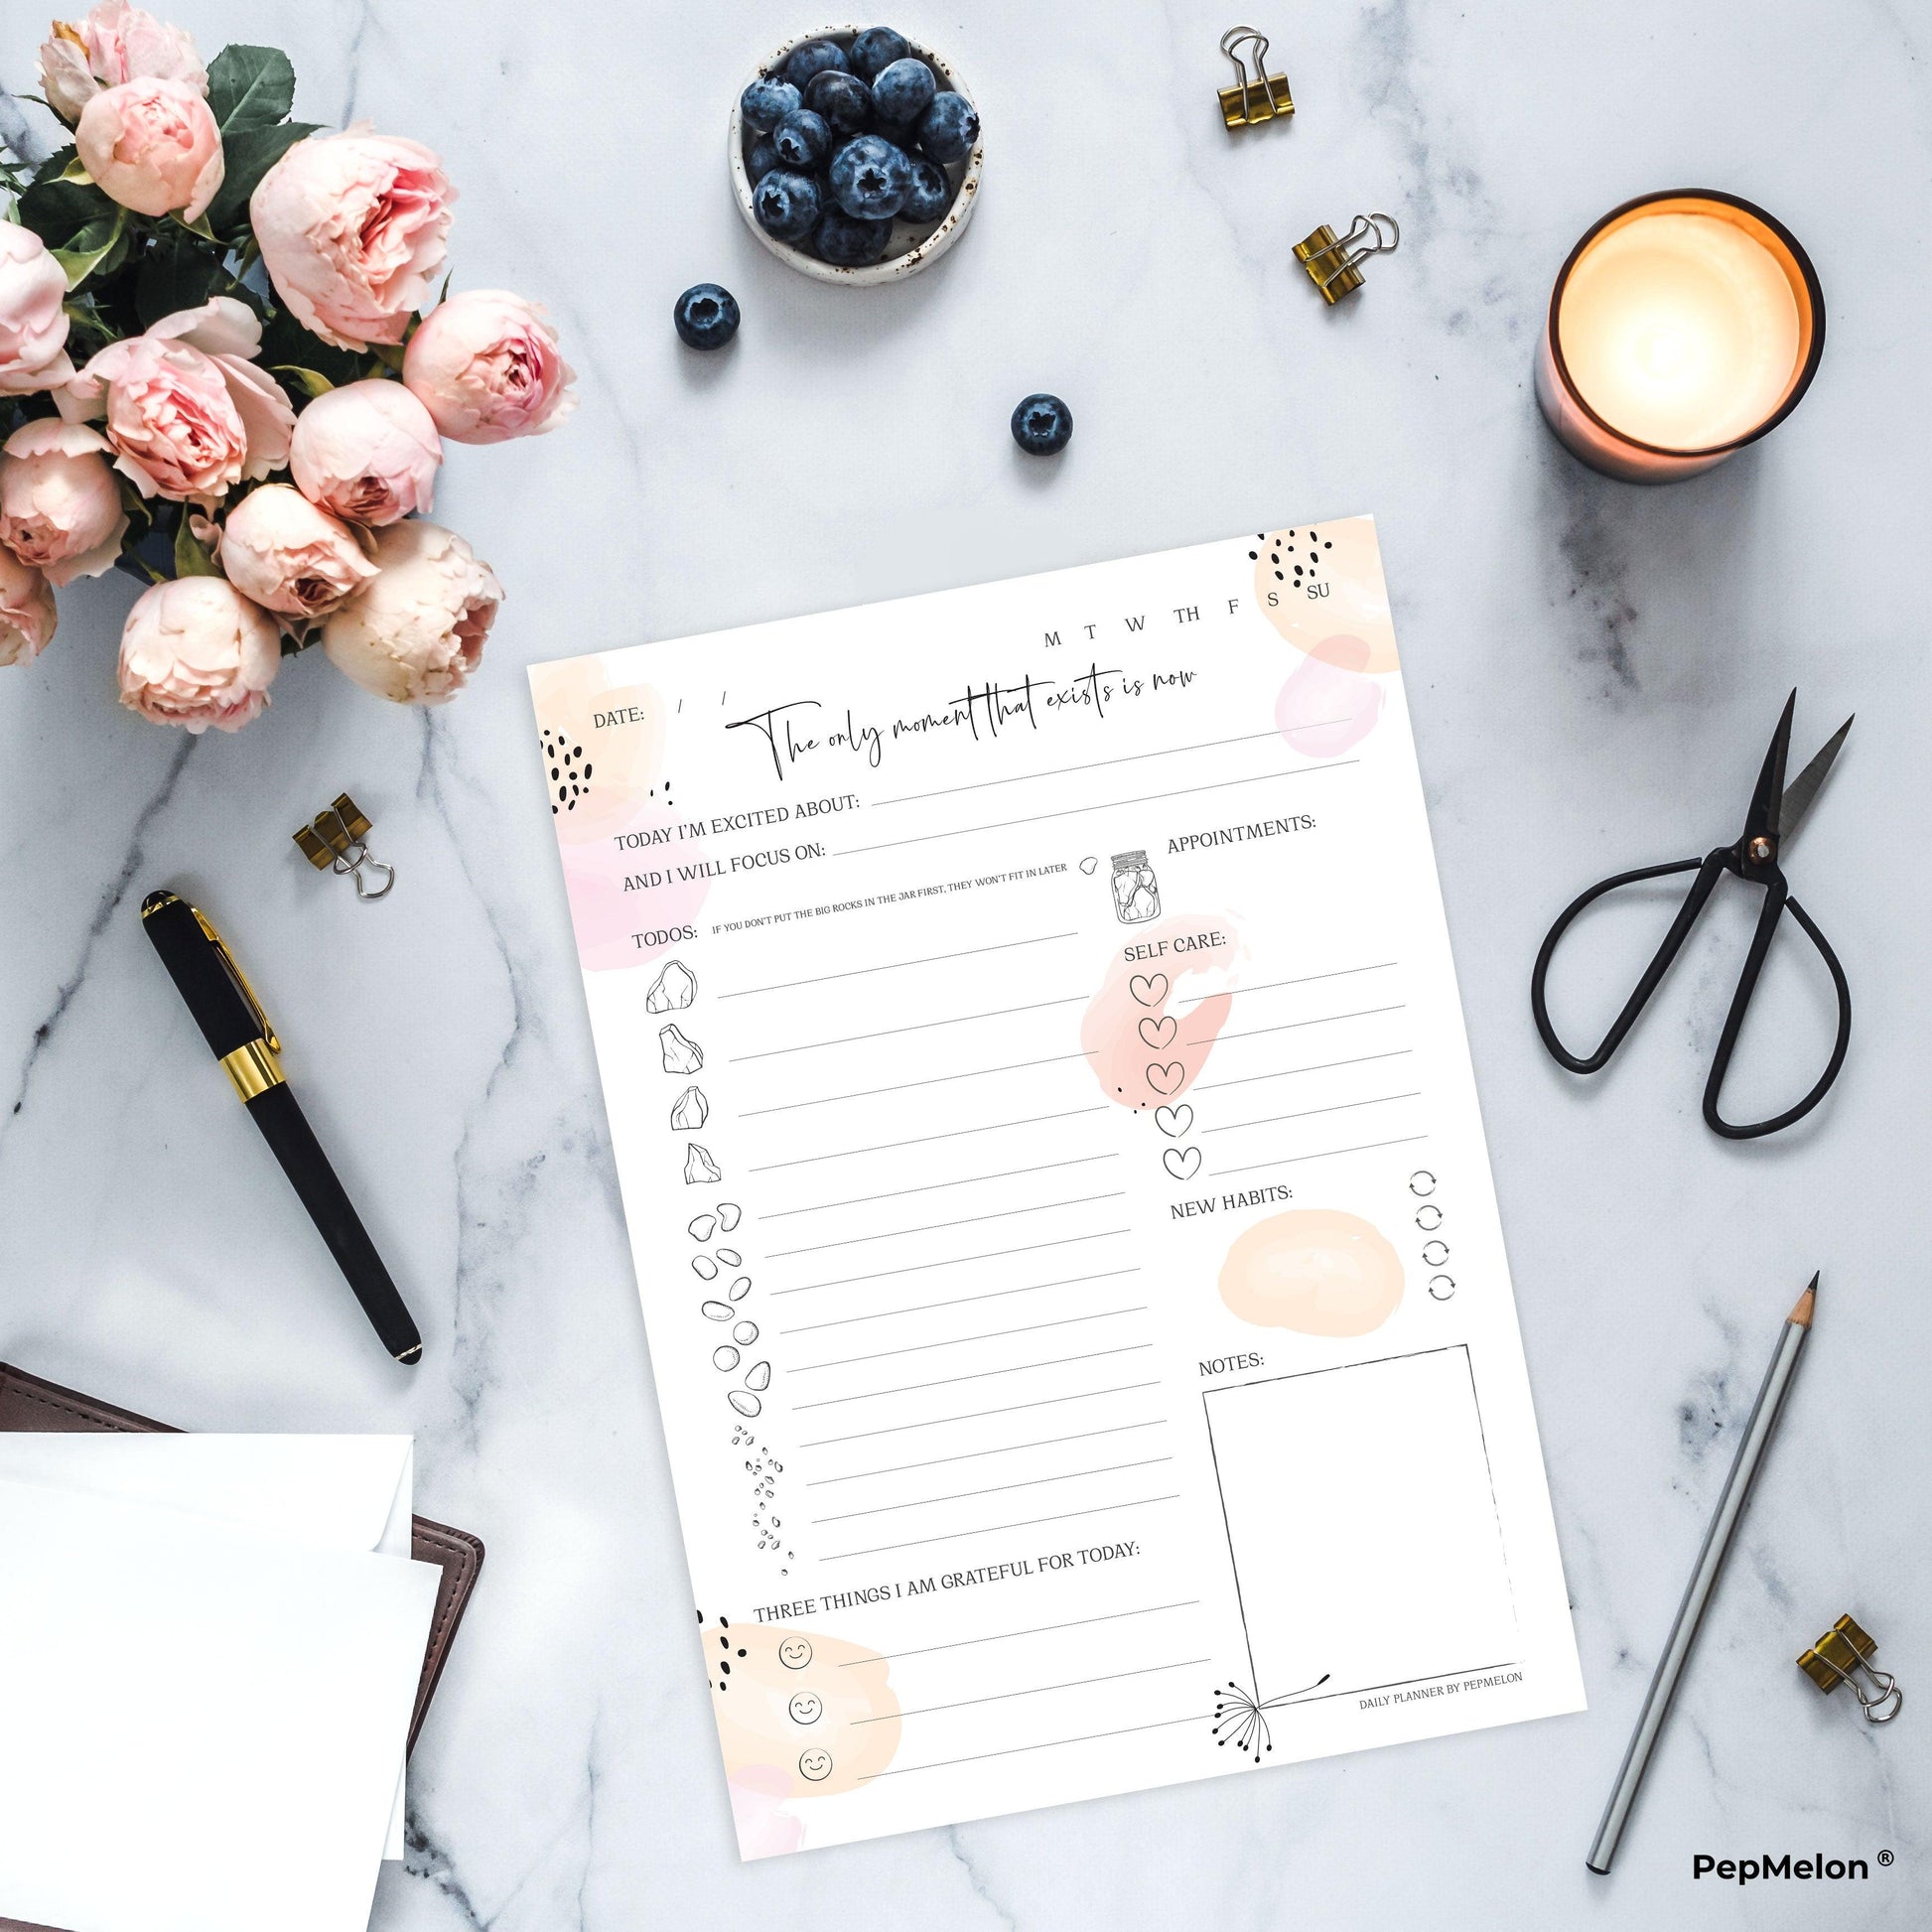 Daily planner printable for 2022, To Do List, Habit tracker - PepMelon